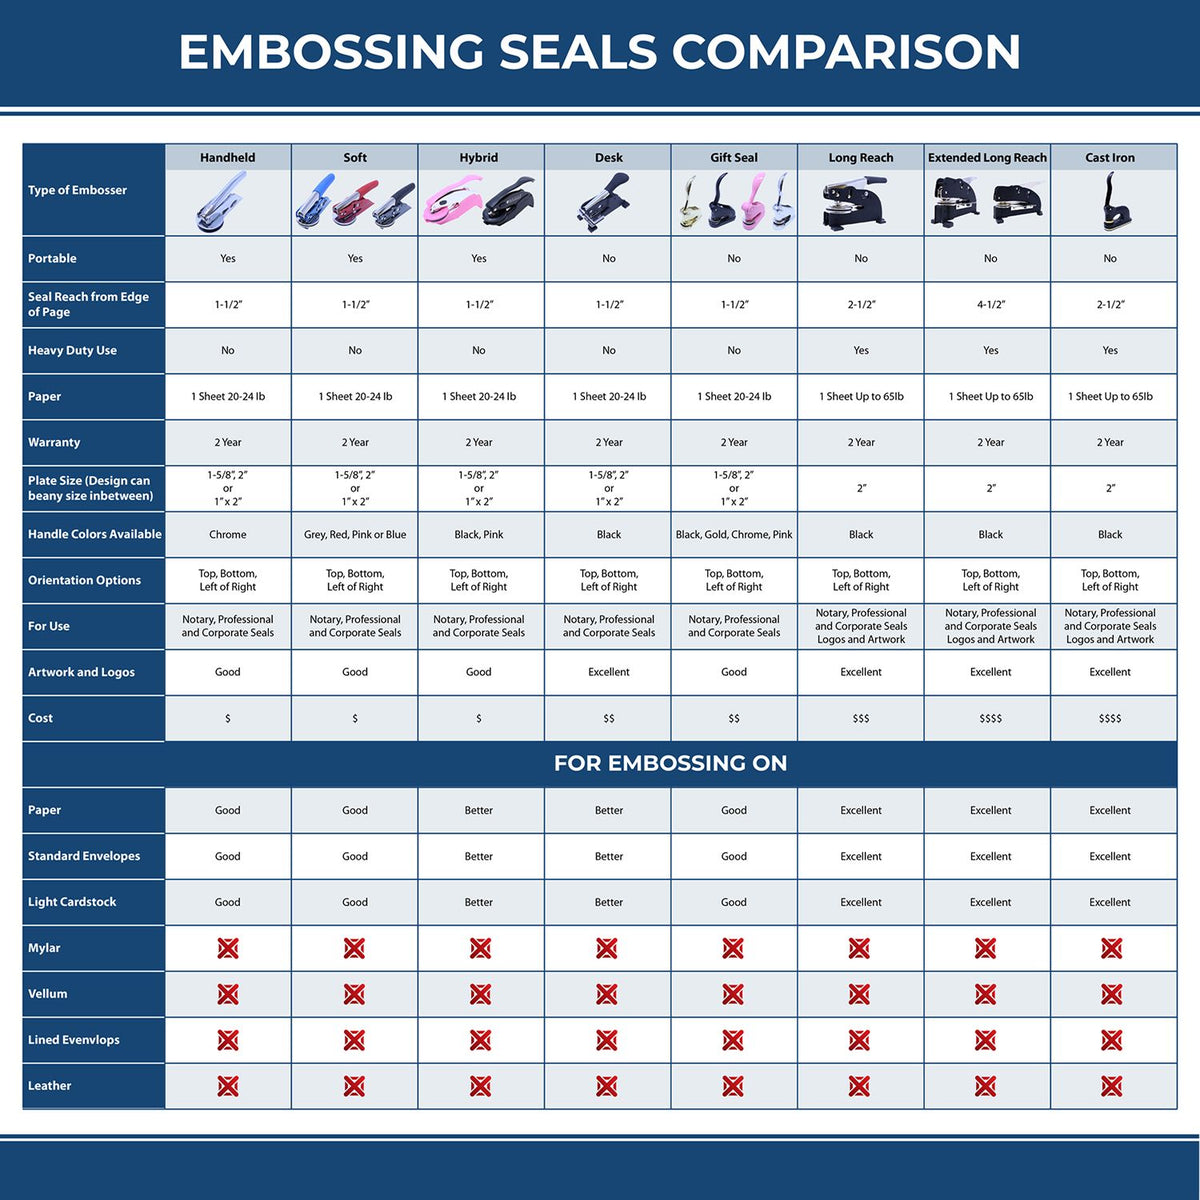 A comparison chart for the different types of mount models available for the State of New Jersey Long Reach Architectural Embossing Seal.